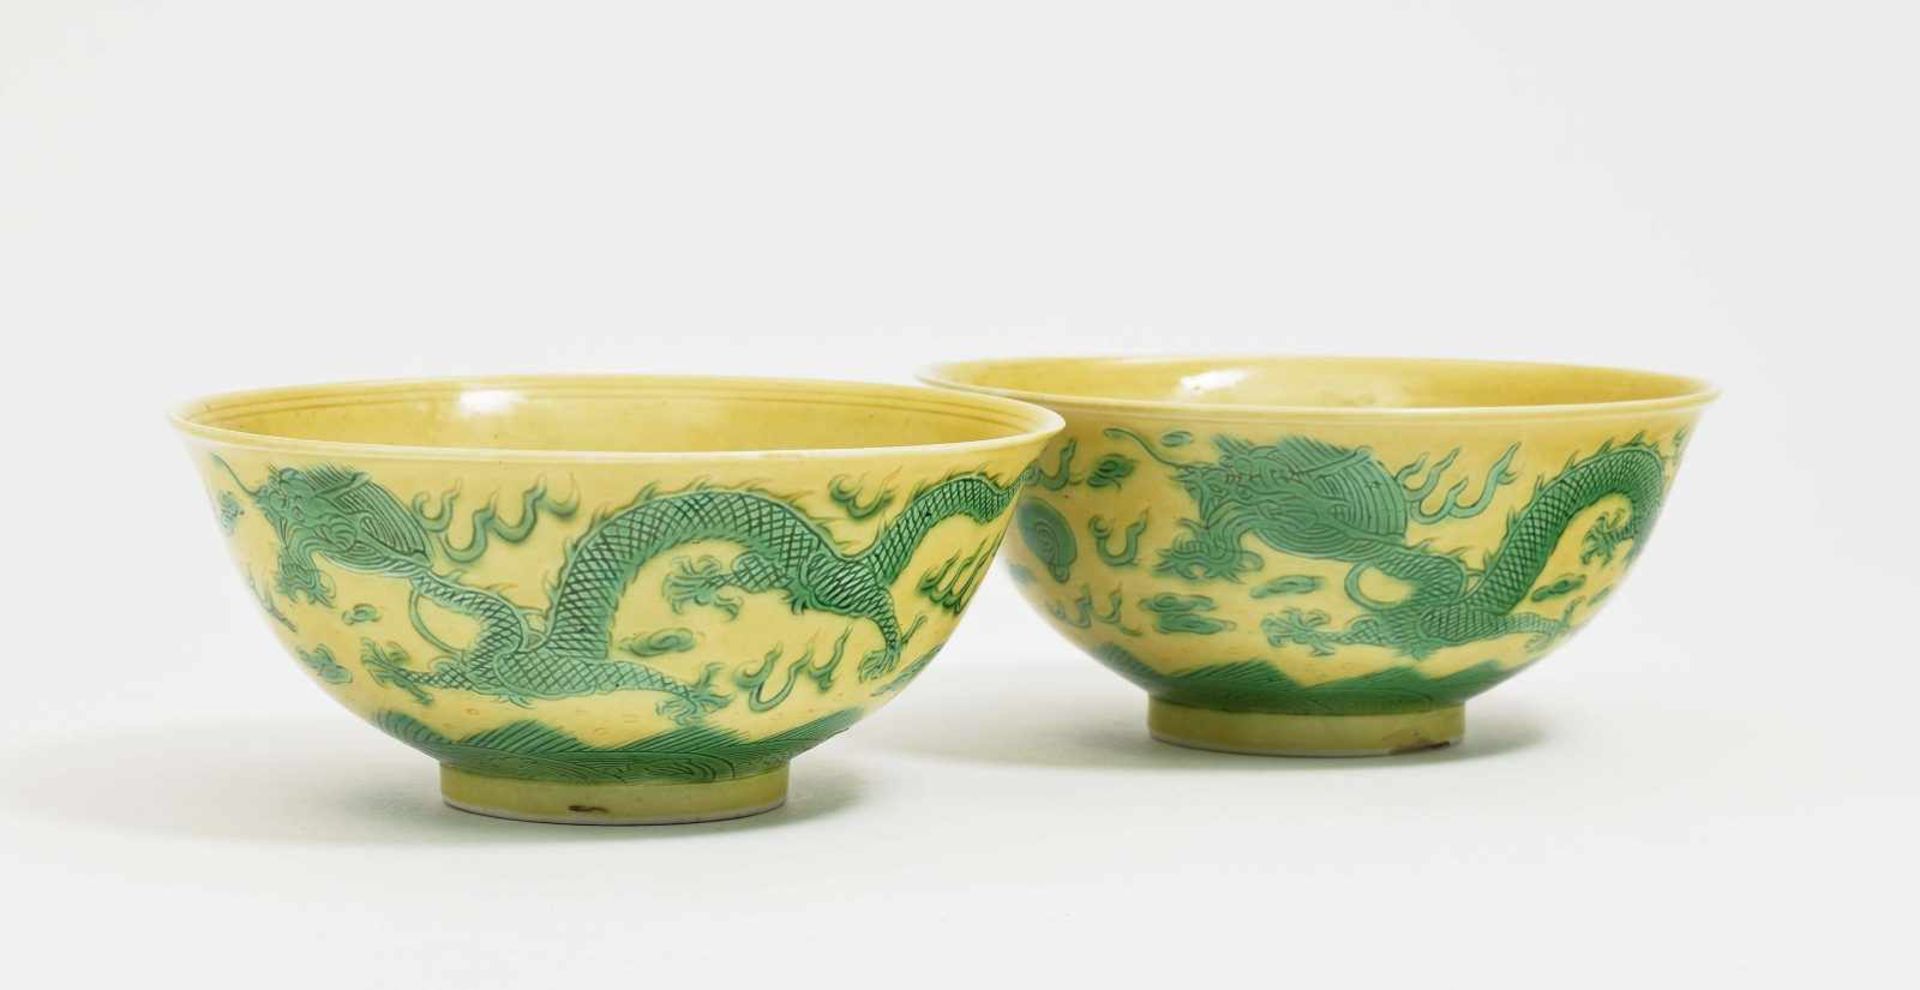 Two Small BowlsChina, Qing Porcelain. Walls and base with incised green dragon decoration. Blue